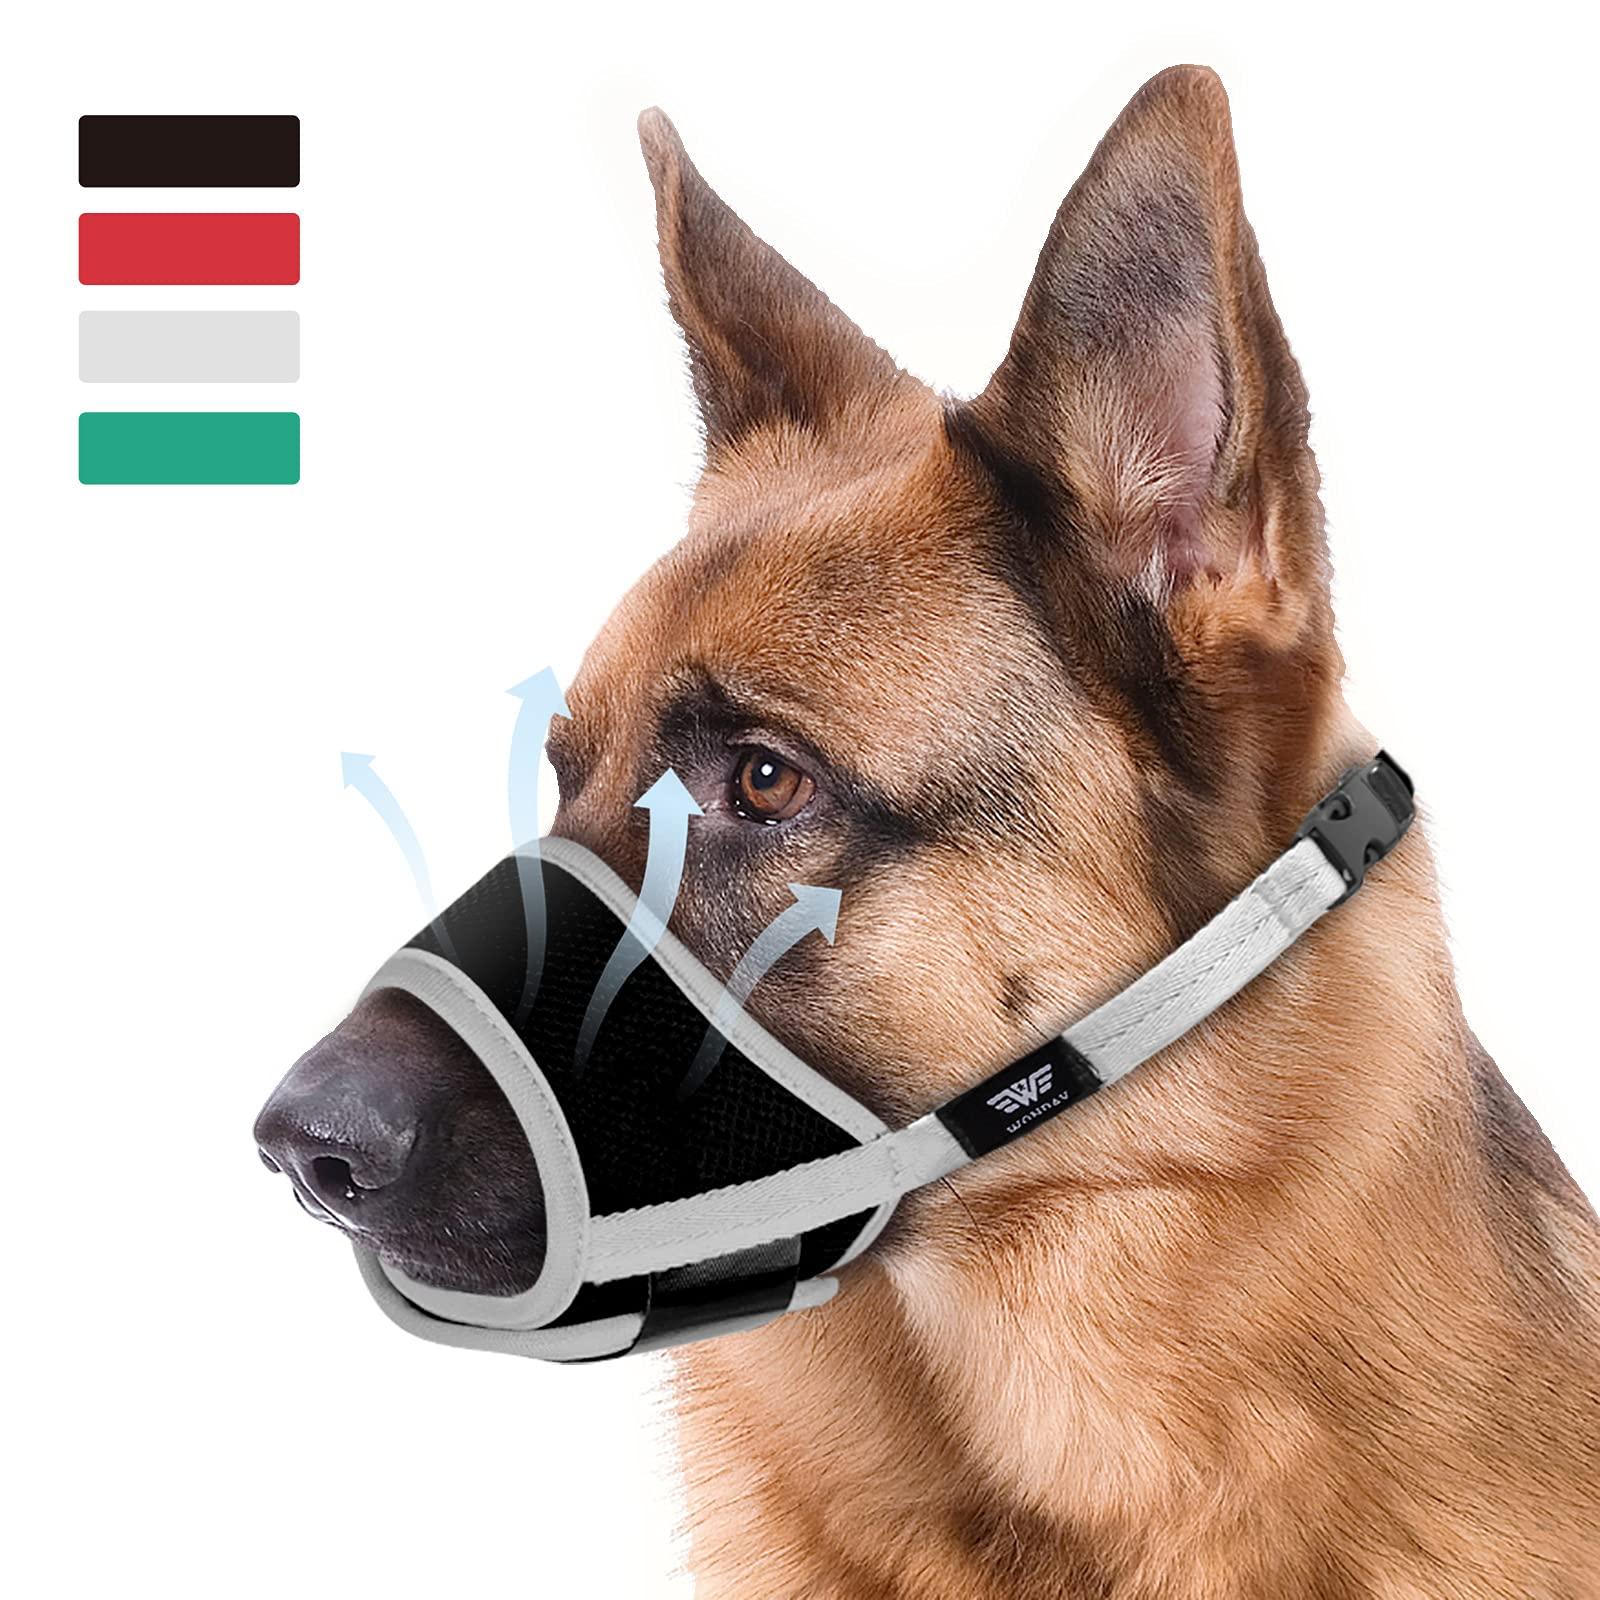 Dog Muzzle for Medium Dogs, Dog Muzzle for Large Dogs Biting, Soft Nylon Muzzle Anti Biting Barking Chewing,Air Mesh Breathable Drinkable Adjustable Pet Muzzle for Medium Large Dogs XL Gray